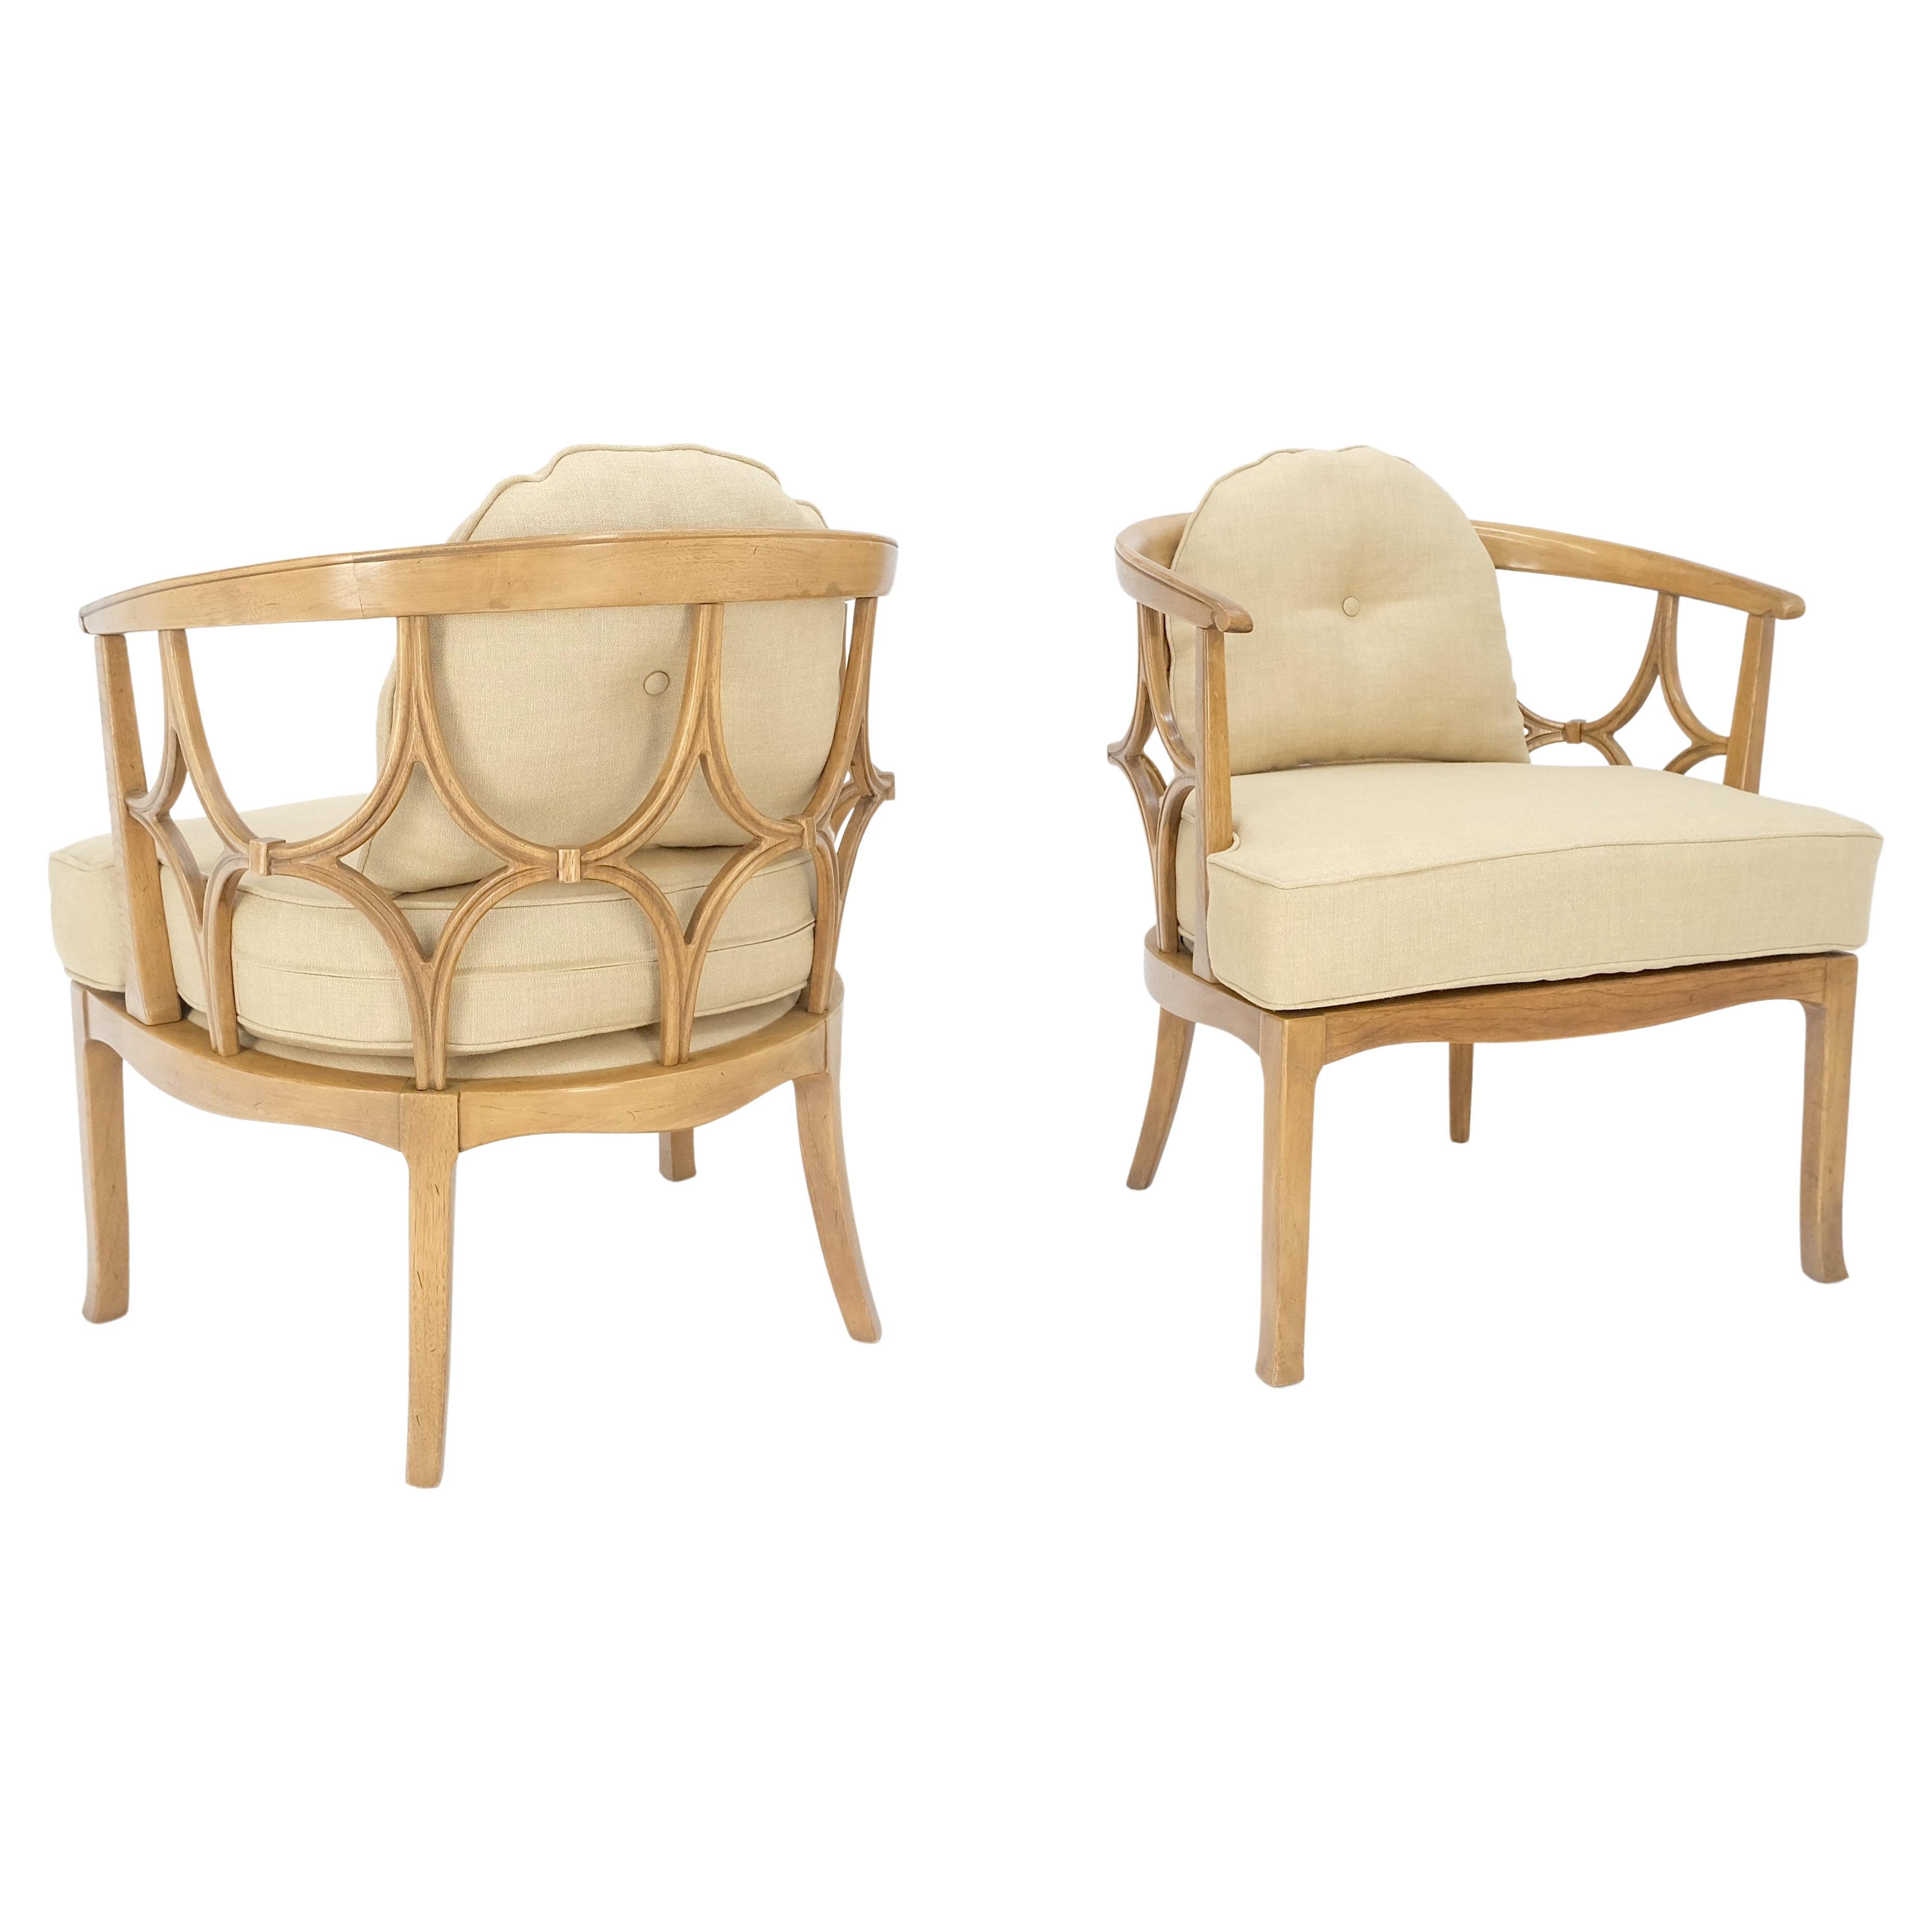 Pair of New Gold Linen Upholstery Barrel Back Wrap Around Lounge Arm Chairs MINT